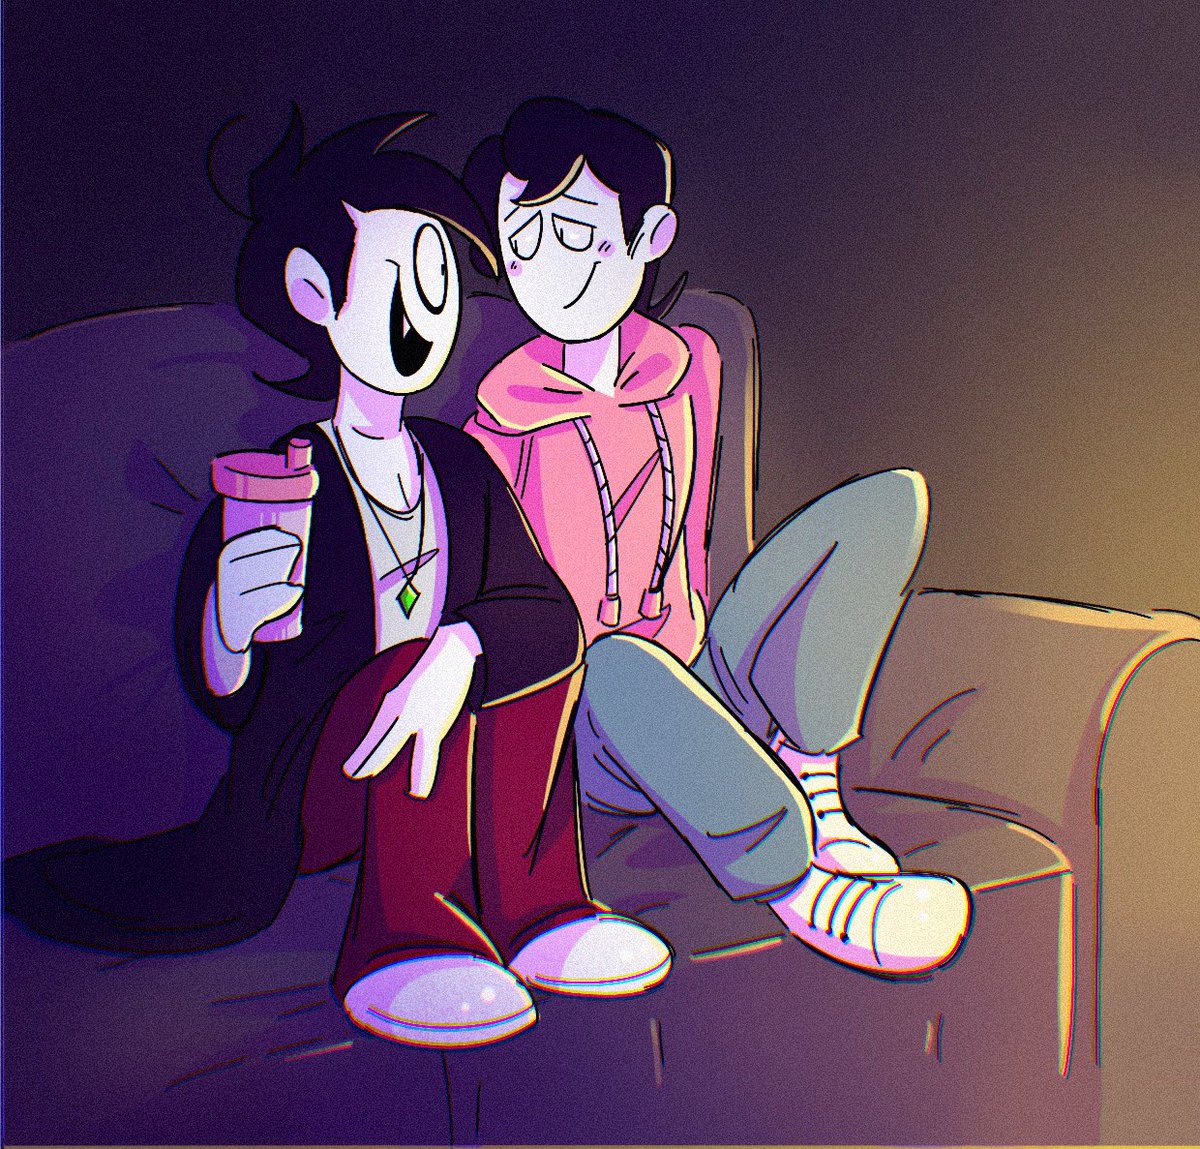 He wanted to make sure he wouldn't lose him again (+ a movie night before the incident). ;)

((#spookymonthfanart #spookymonth #spookymonthstreber #spookymonthkevin #candybats #kevinxstreber #streberxkevin ))